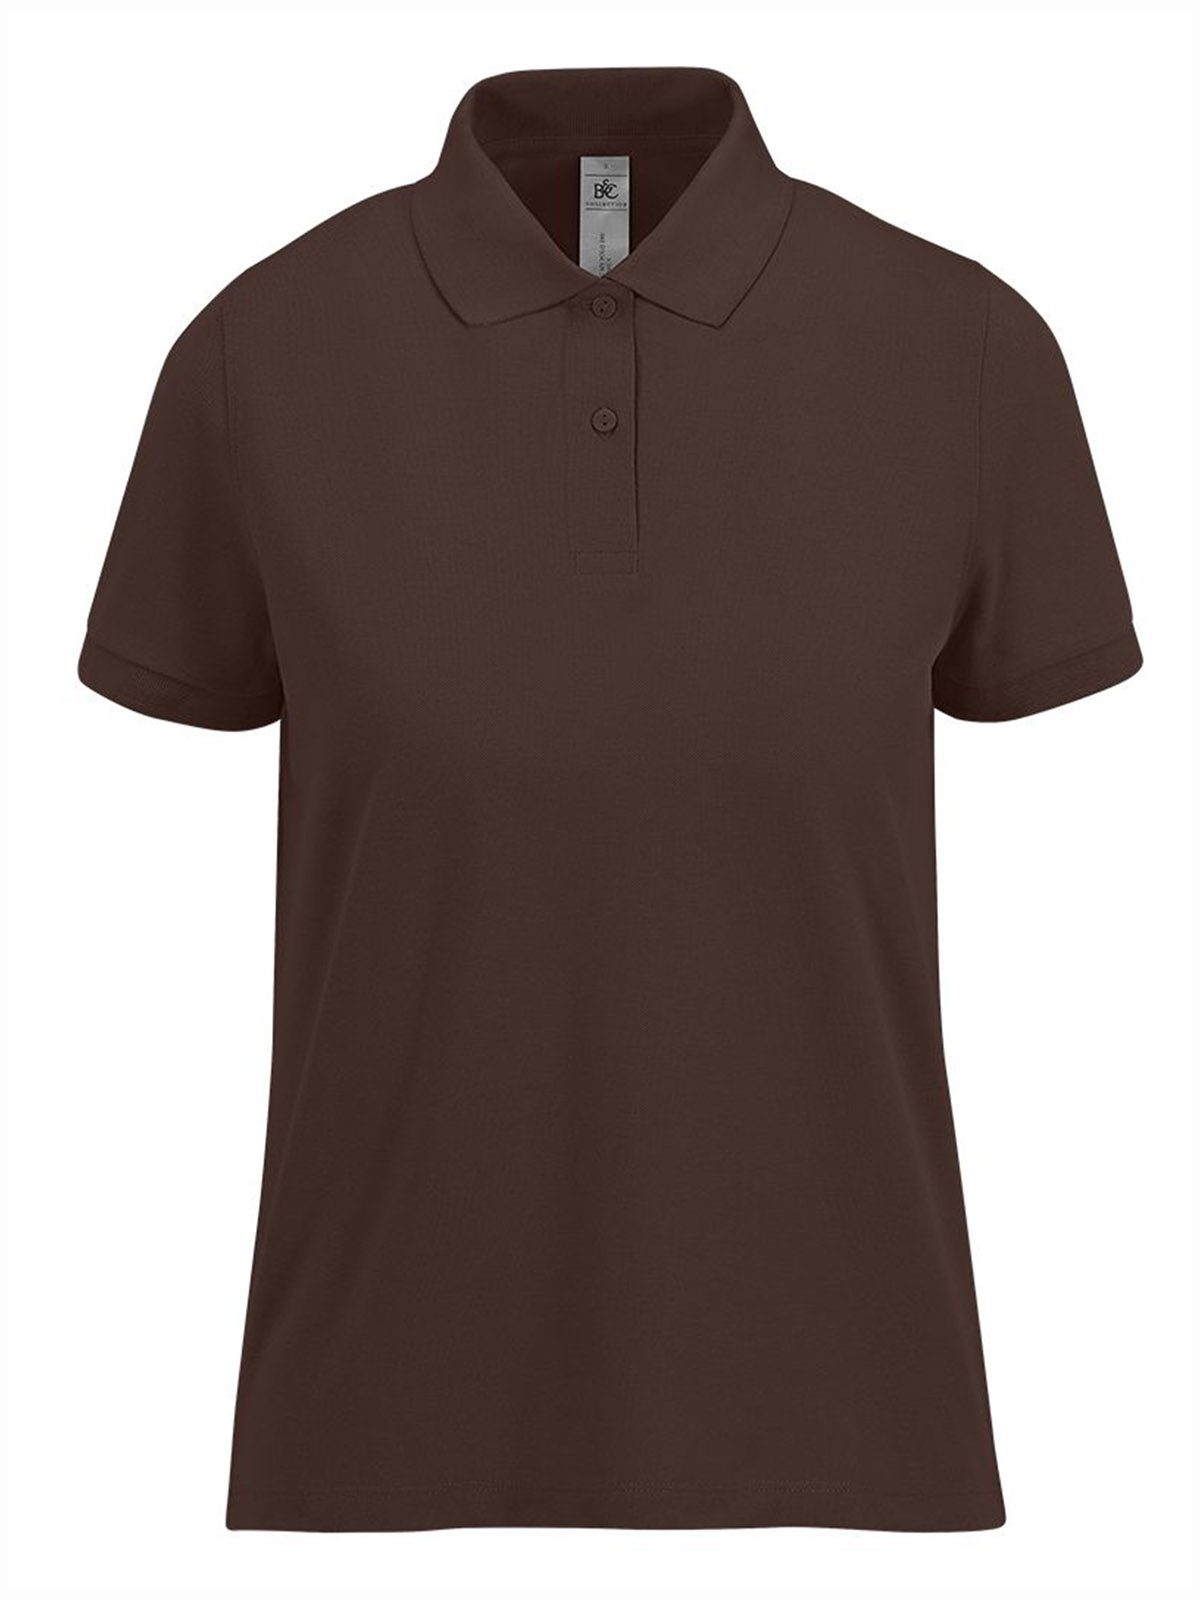 bc-my-polo-180-women-roasted-coffee.webp